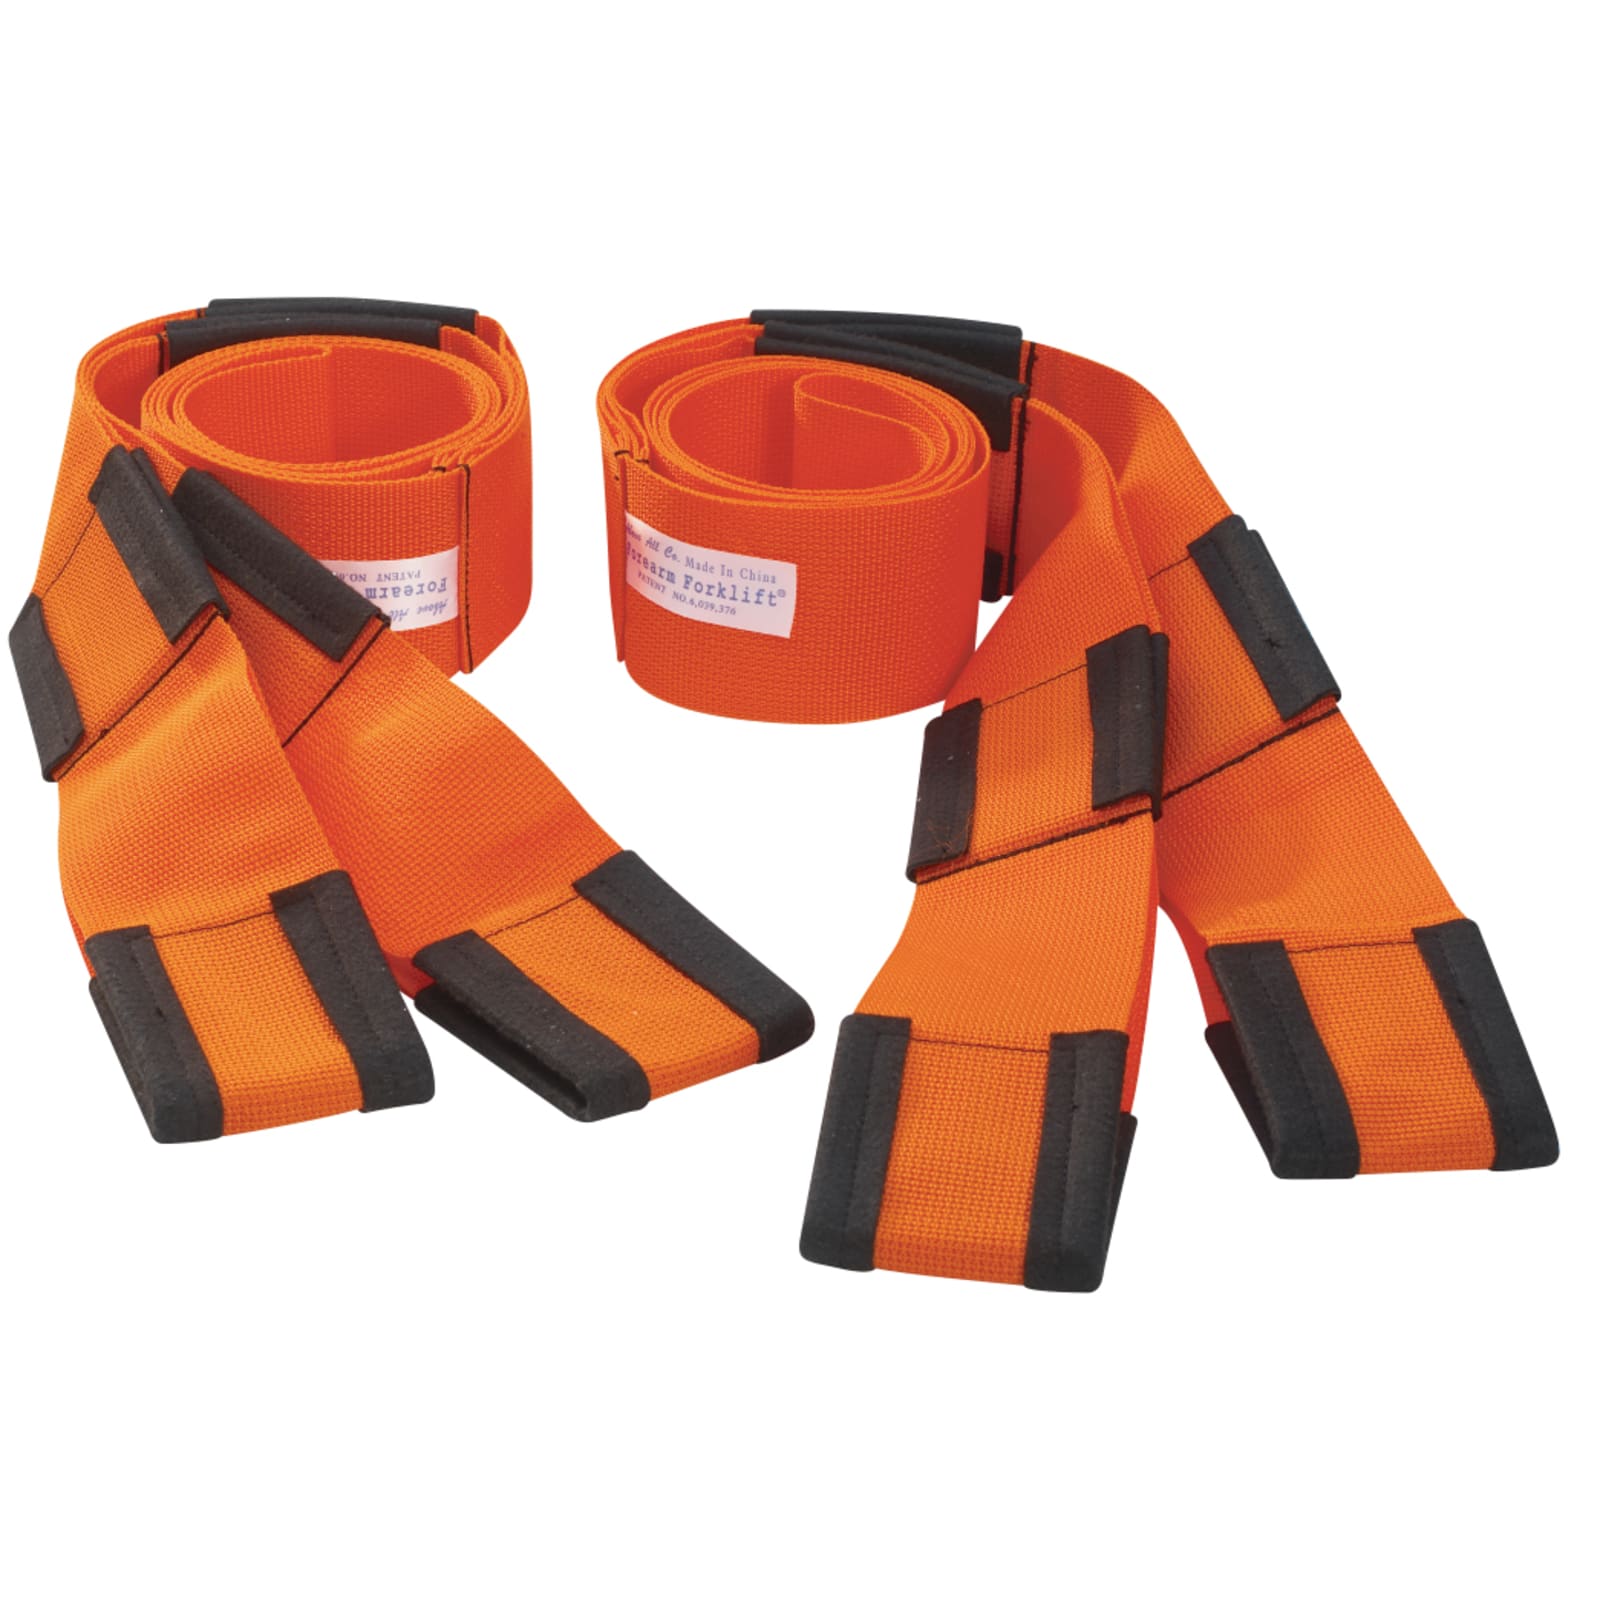 Forearm Forklift Lifting Straps by Forearm Forklift at Fleet Farm